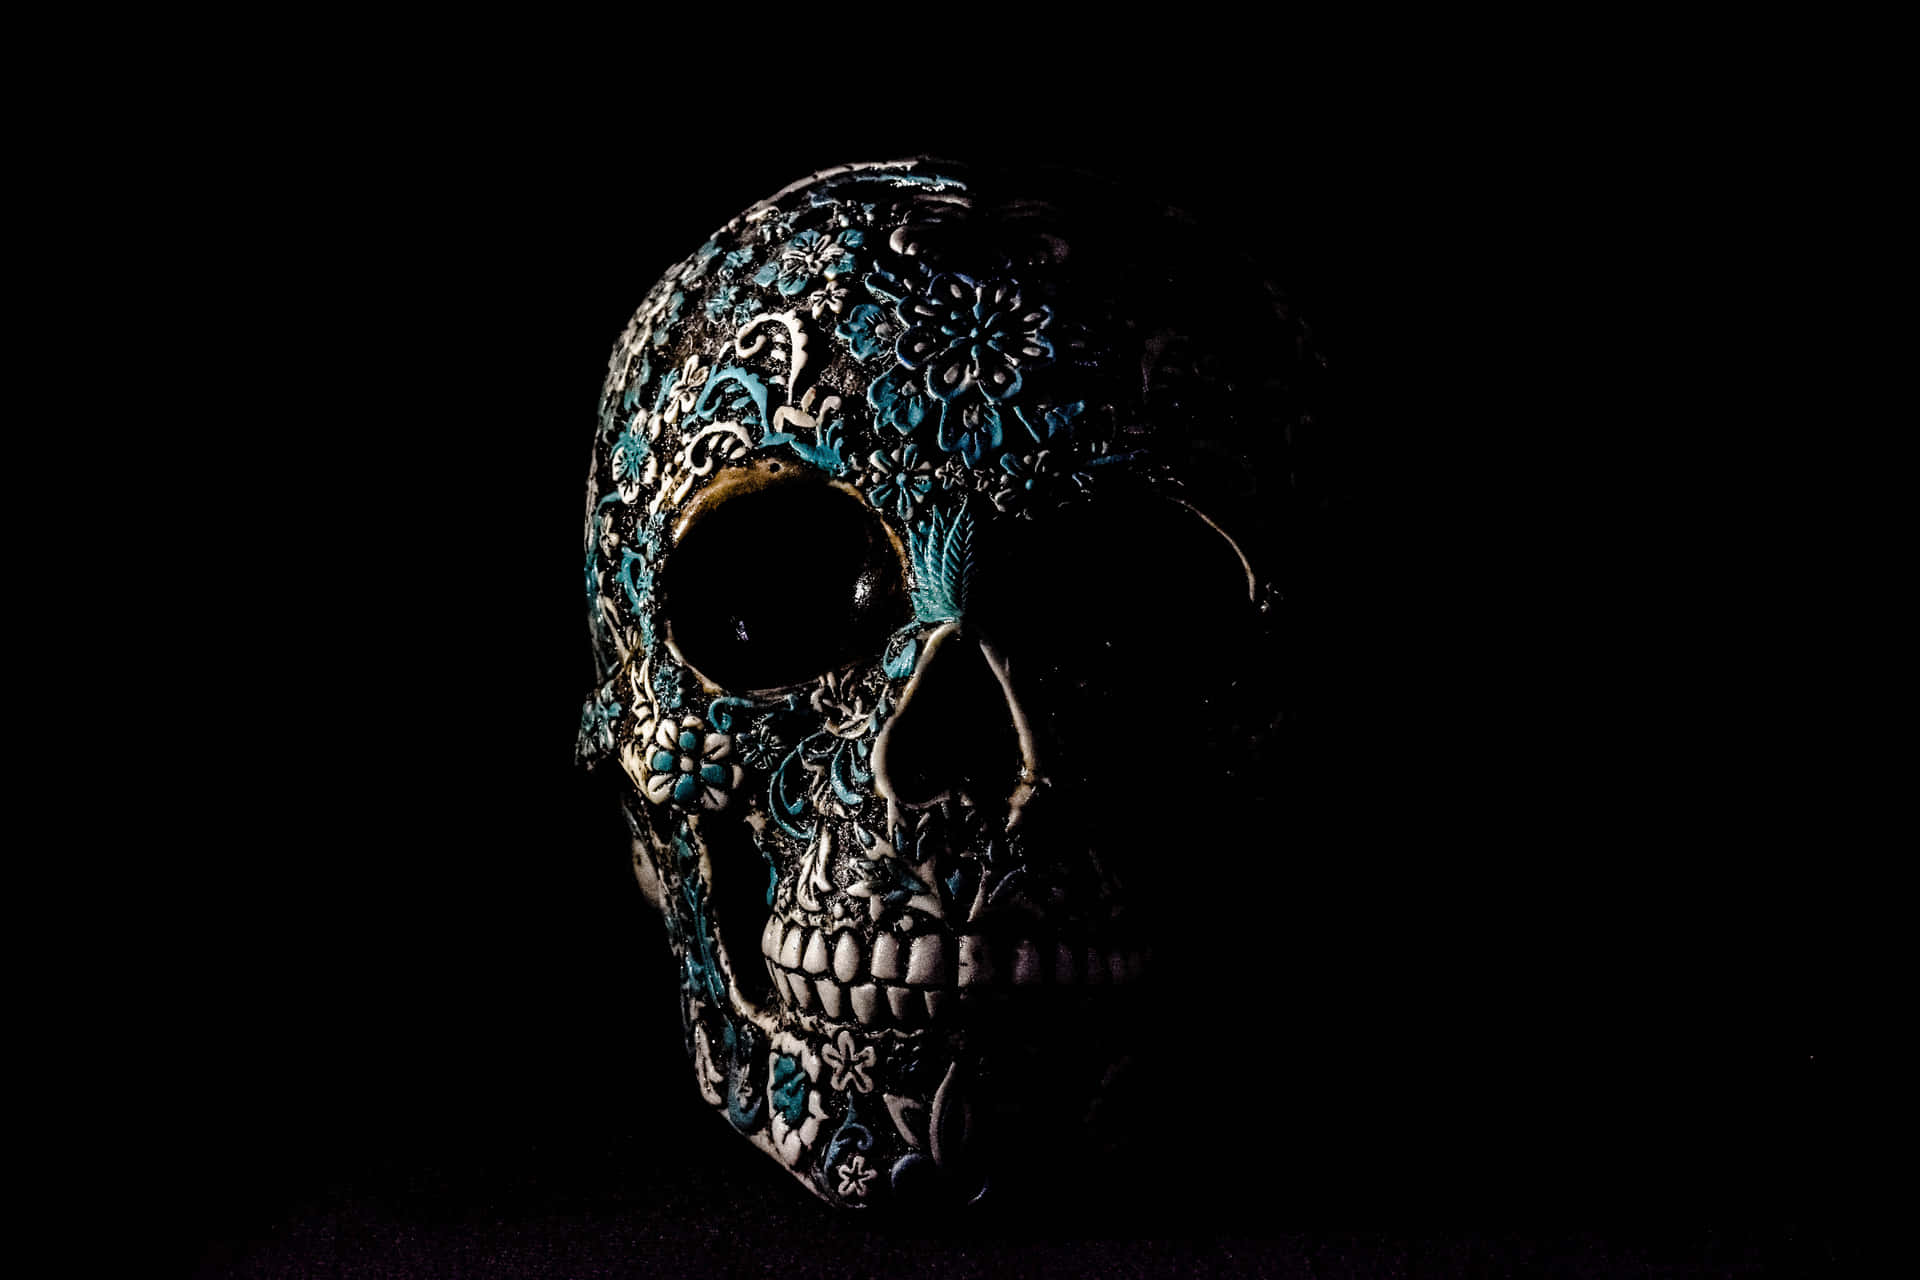 "Staring into the Soul of the Awesome Skull" Wallpaper